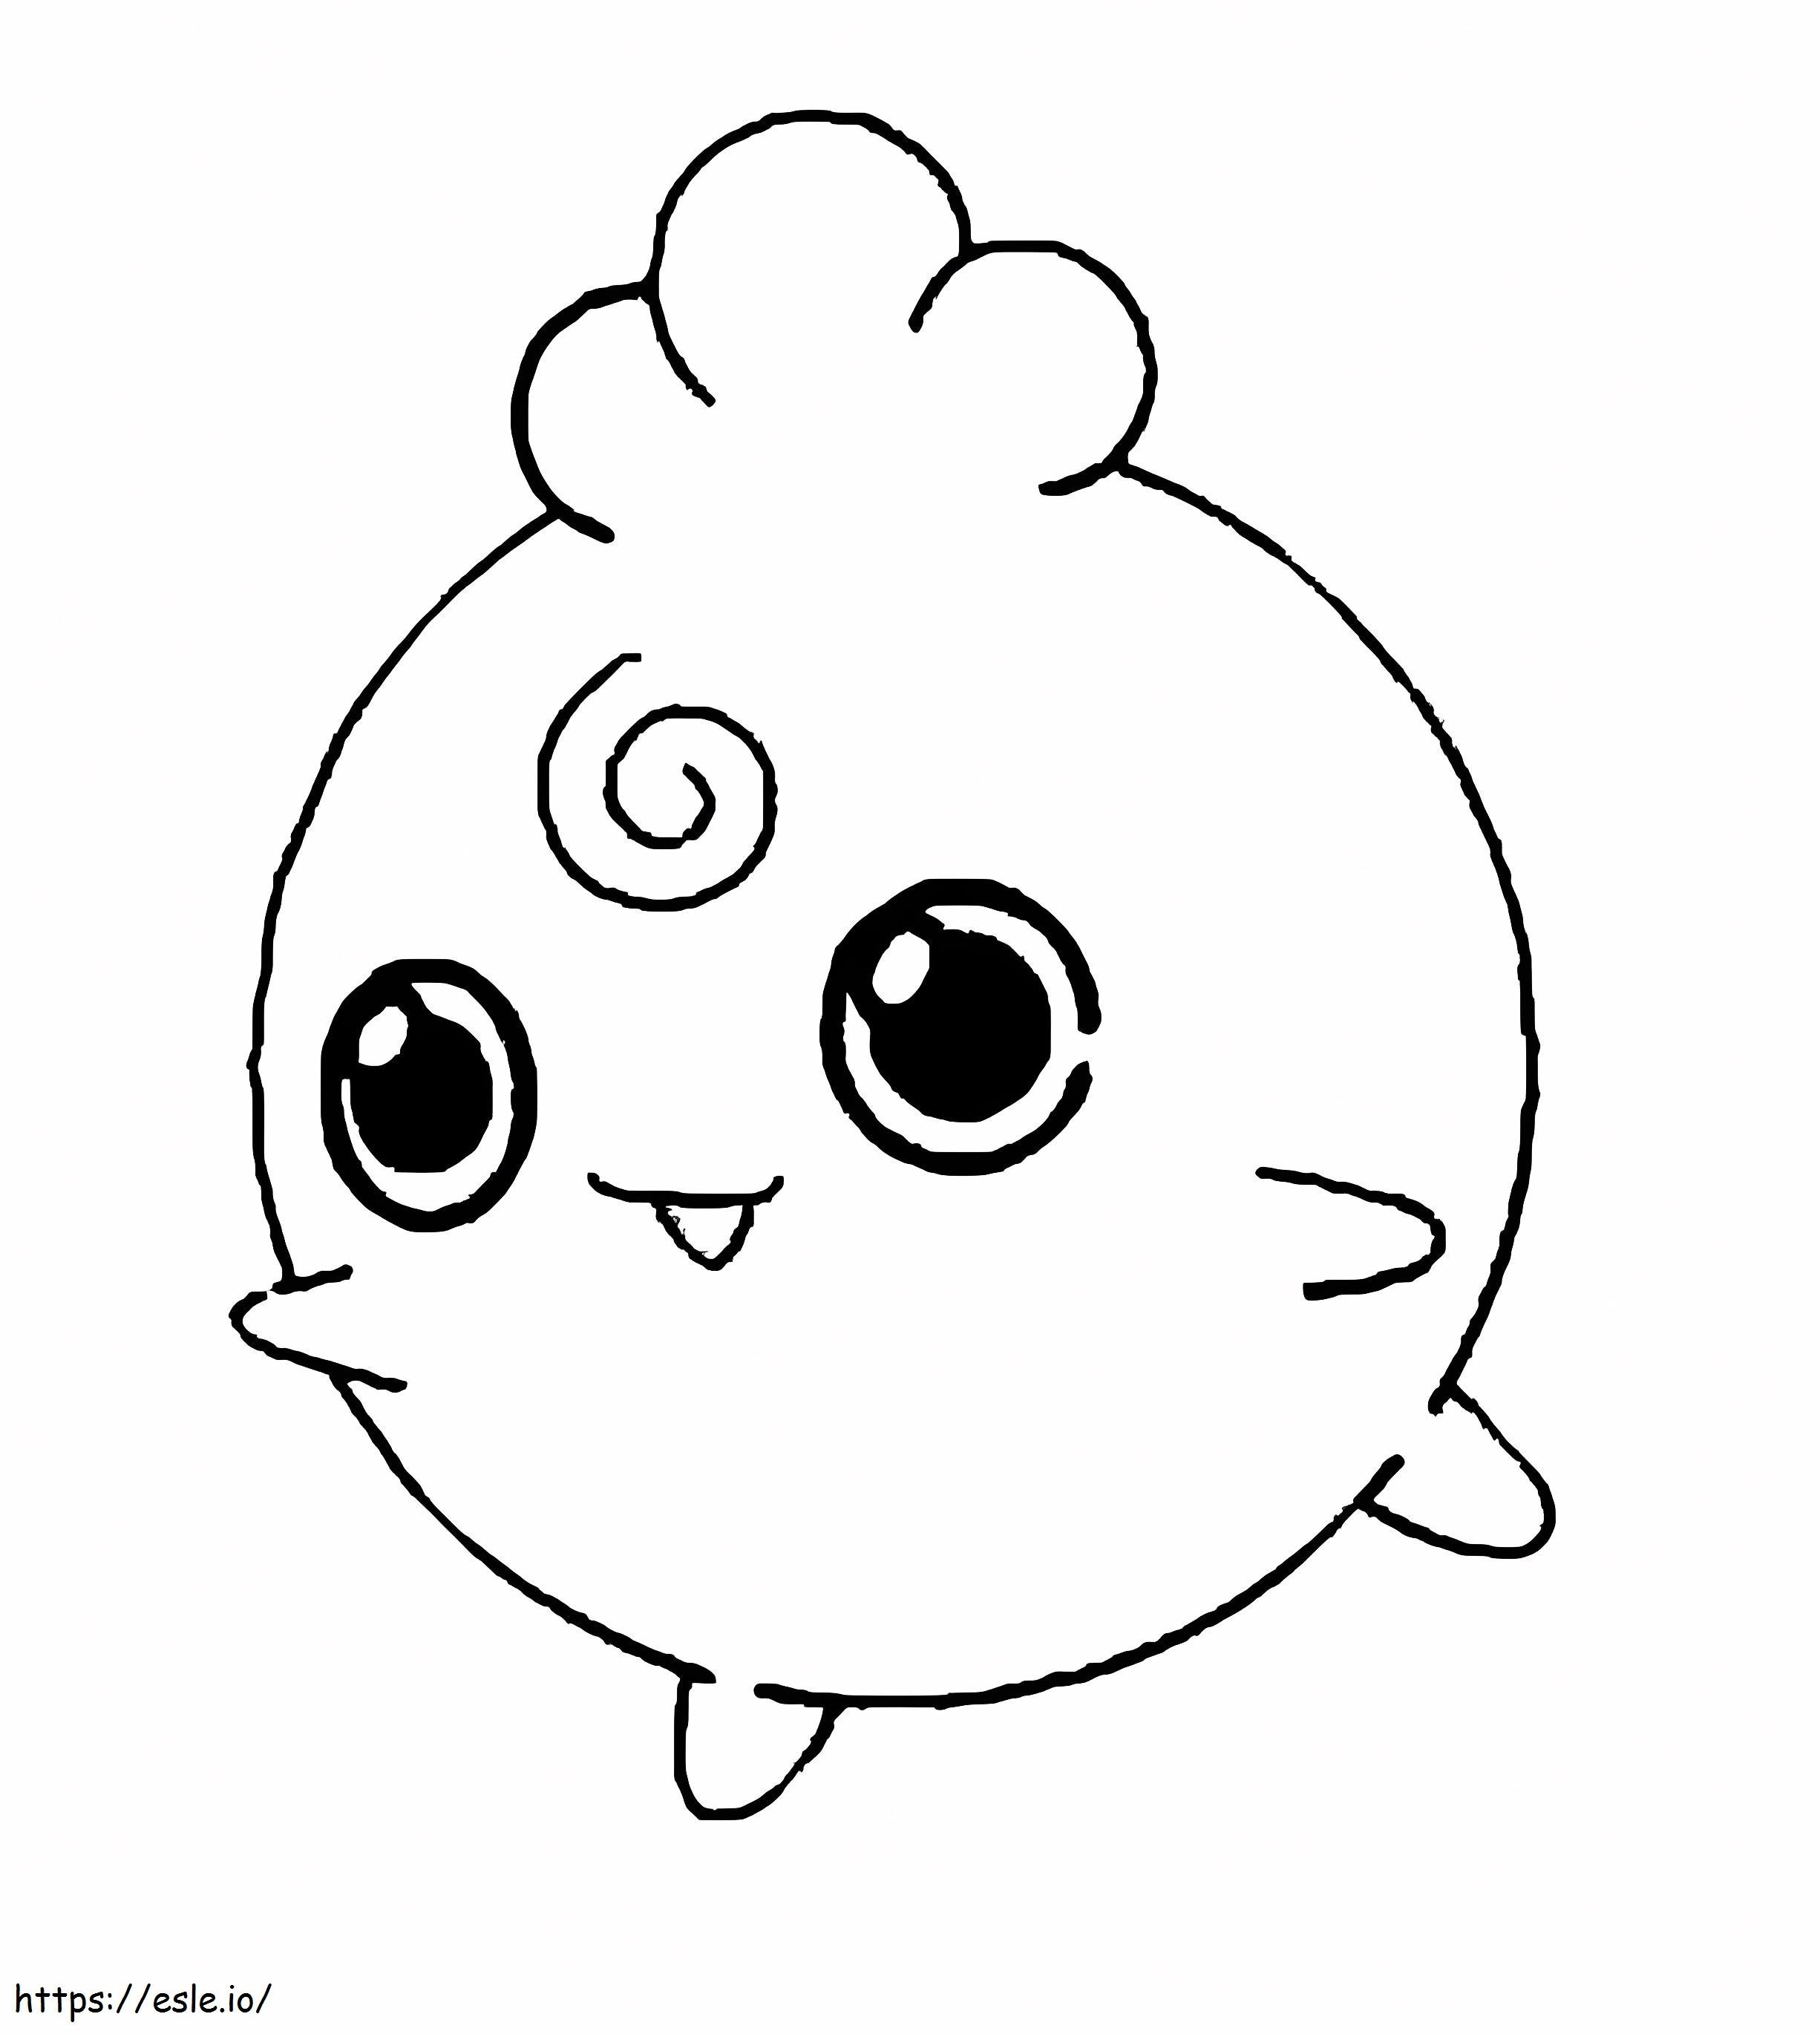 Igglybuff Gen 2 Pokemon coloring page